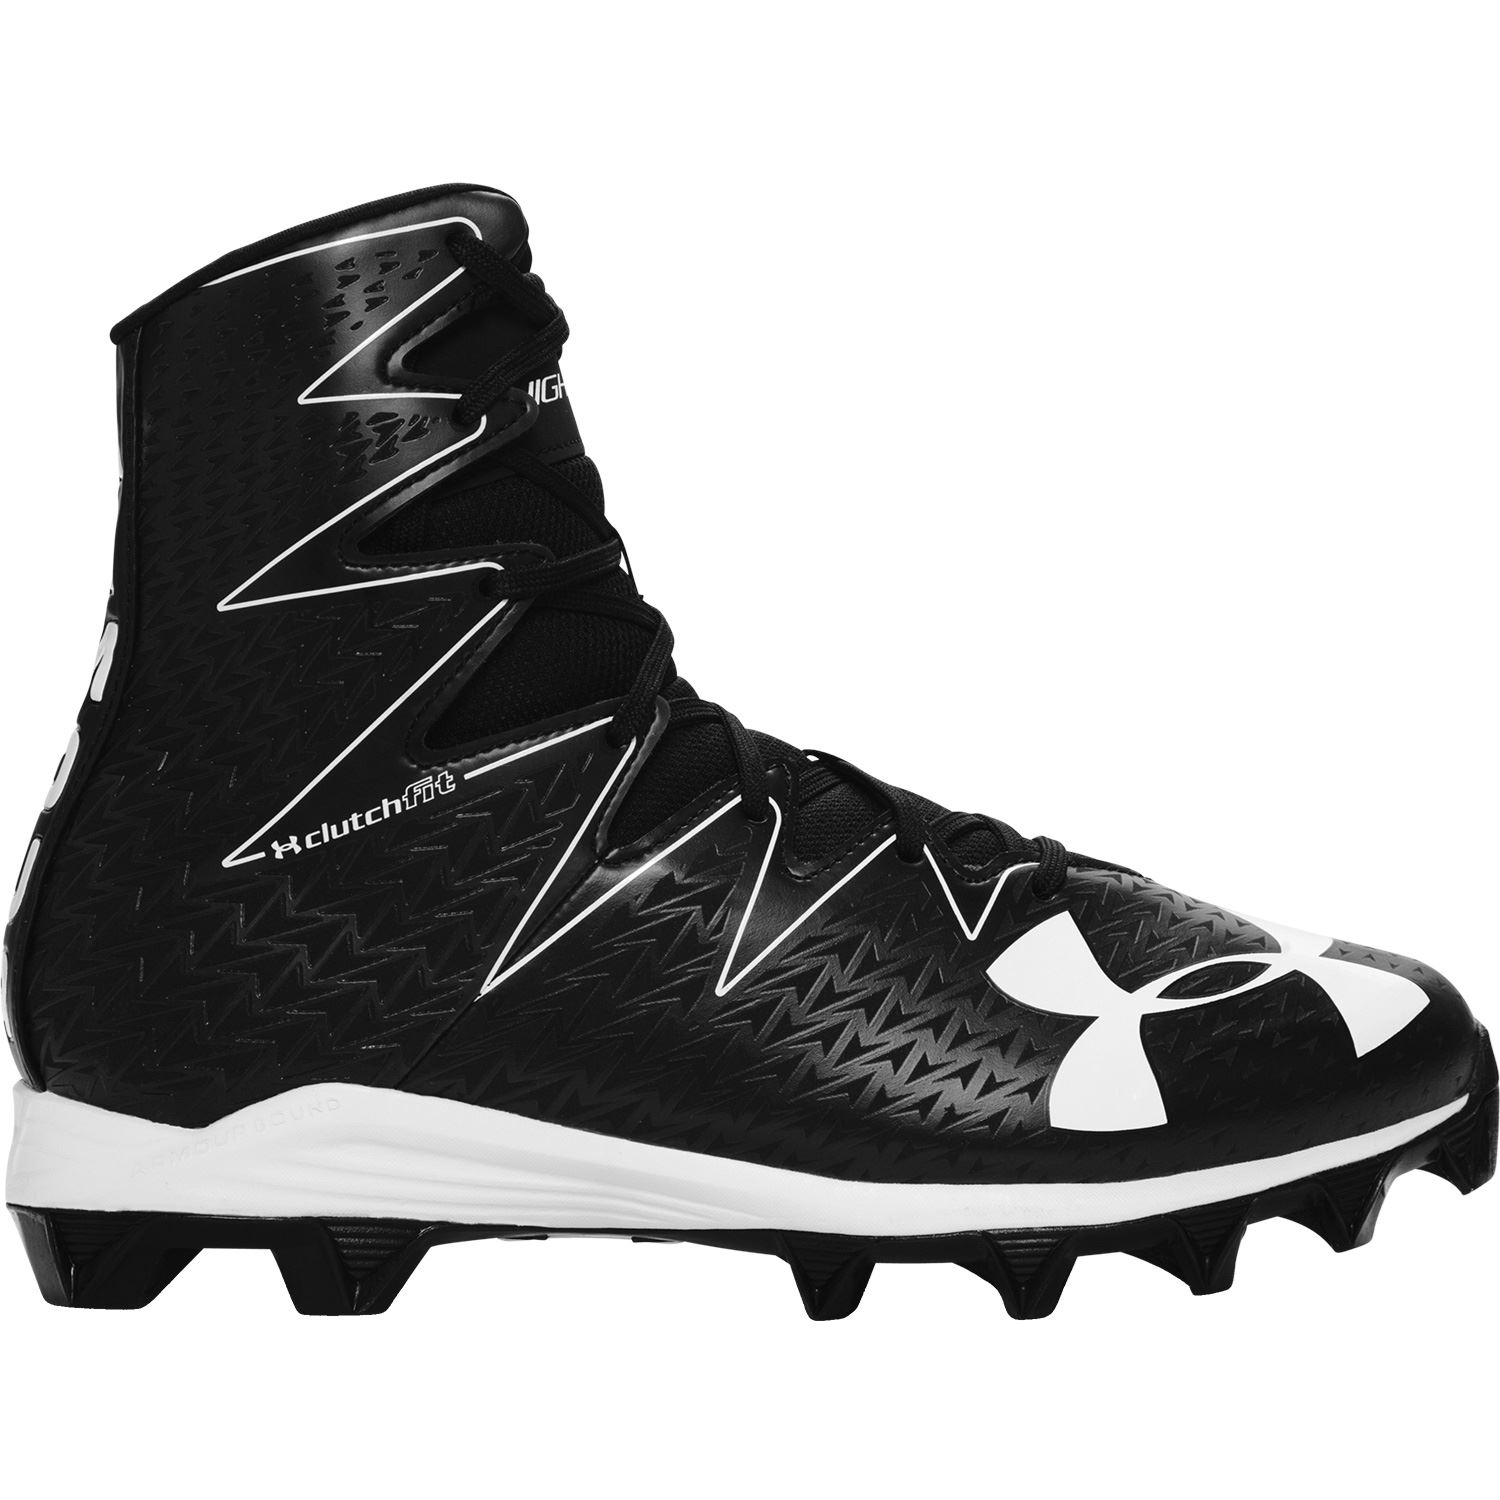 RM Youth Football Cleats Shoes